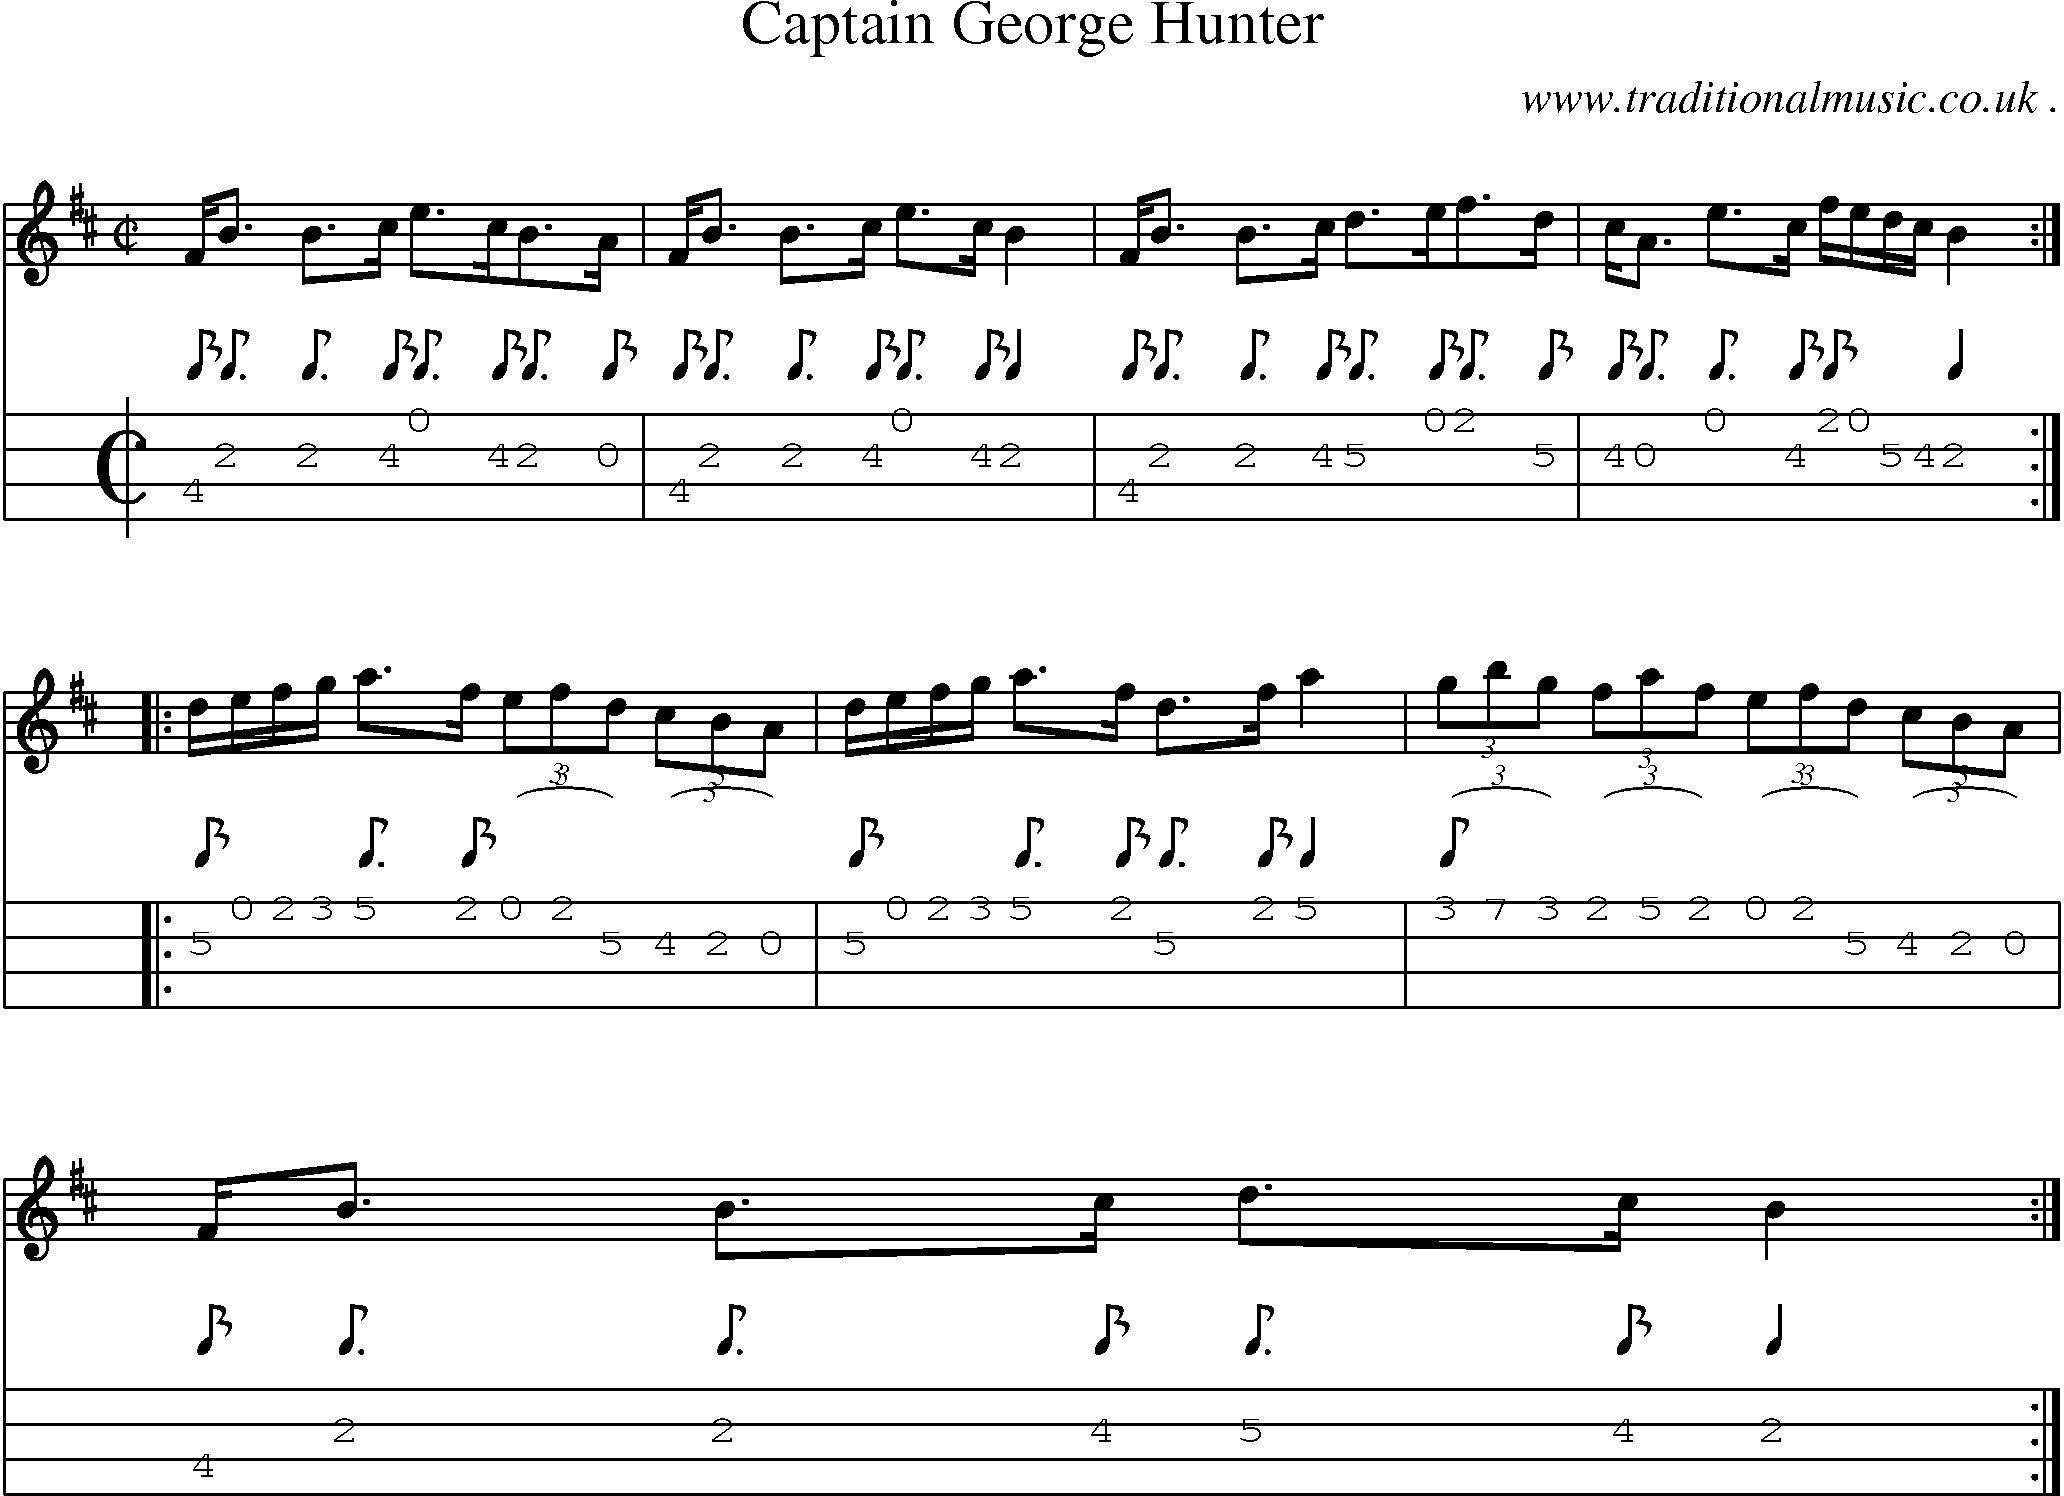 Sheet-music  score, Chords and Mandolin Tabs for Captain George Hunter